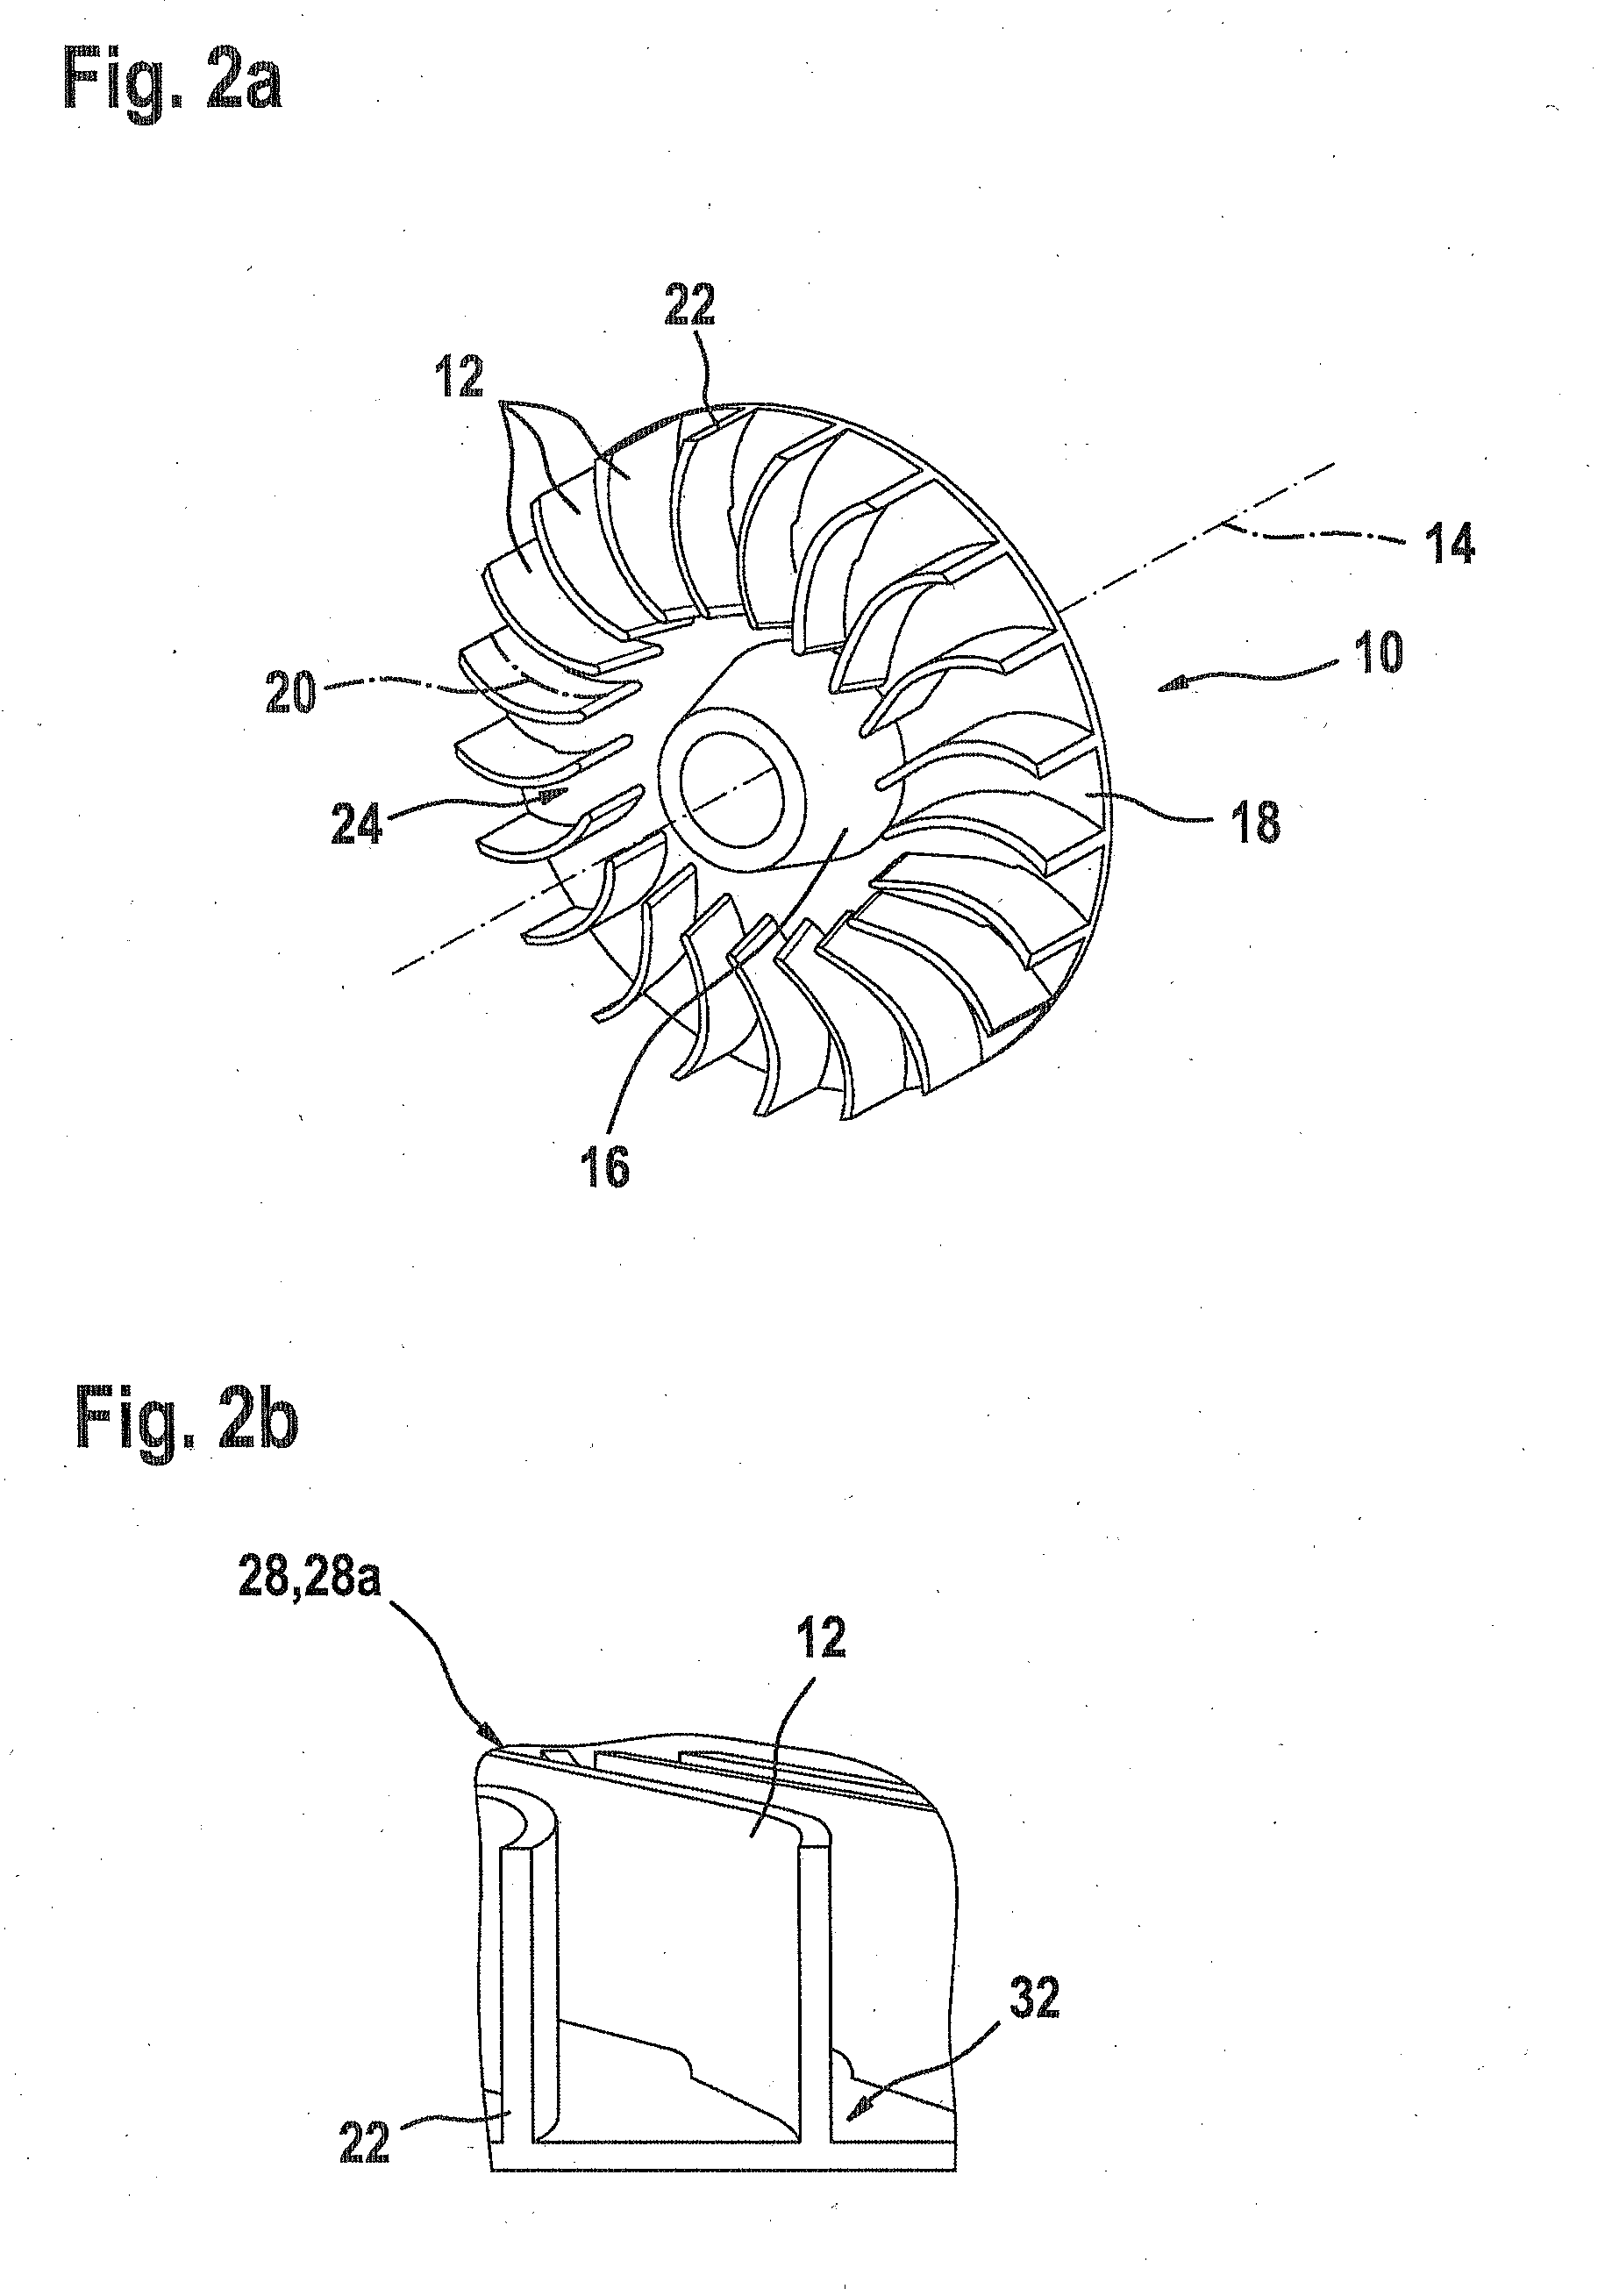 Fan and method for operating a fan